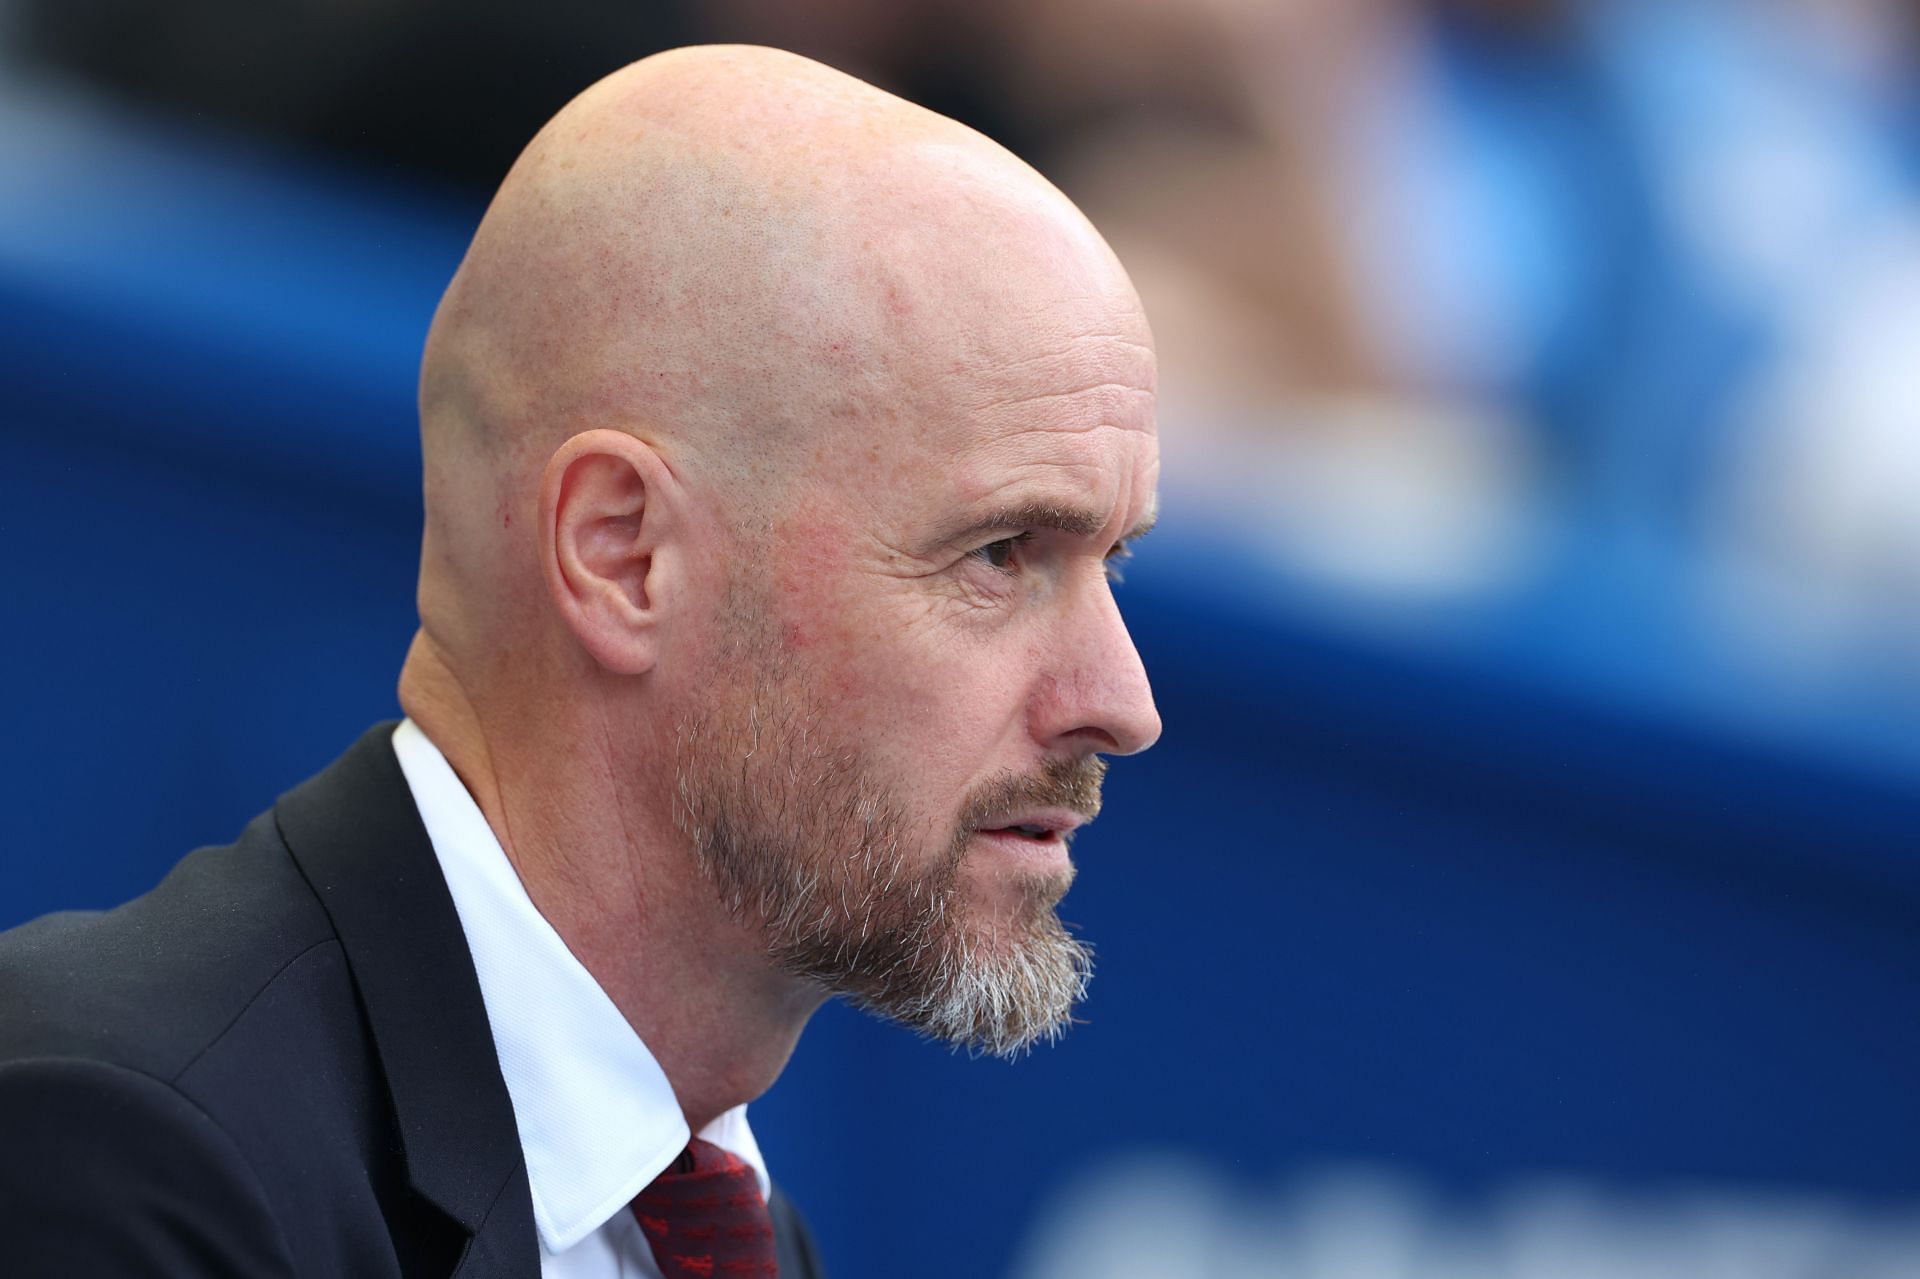 Erik ten Hag provides injury update on Rasmus Hojlund and Leny Yoro after Manchester United’s 1-2 loss against Arsenal